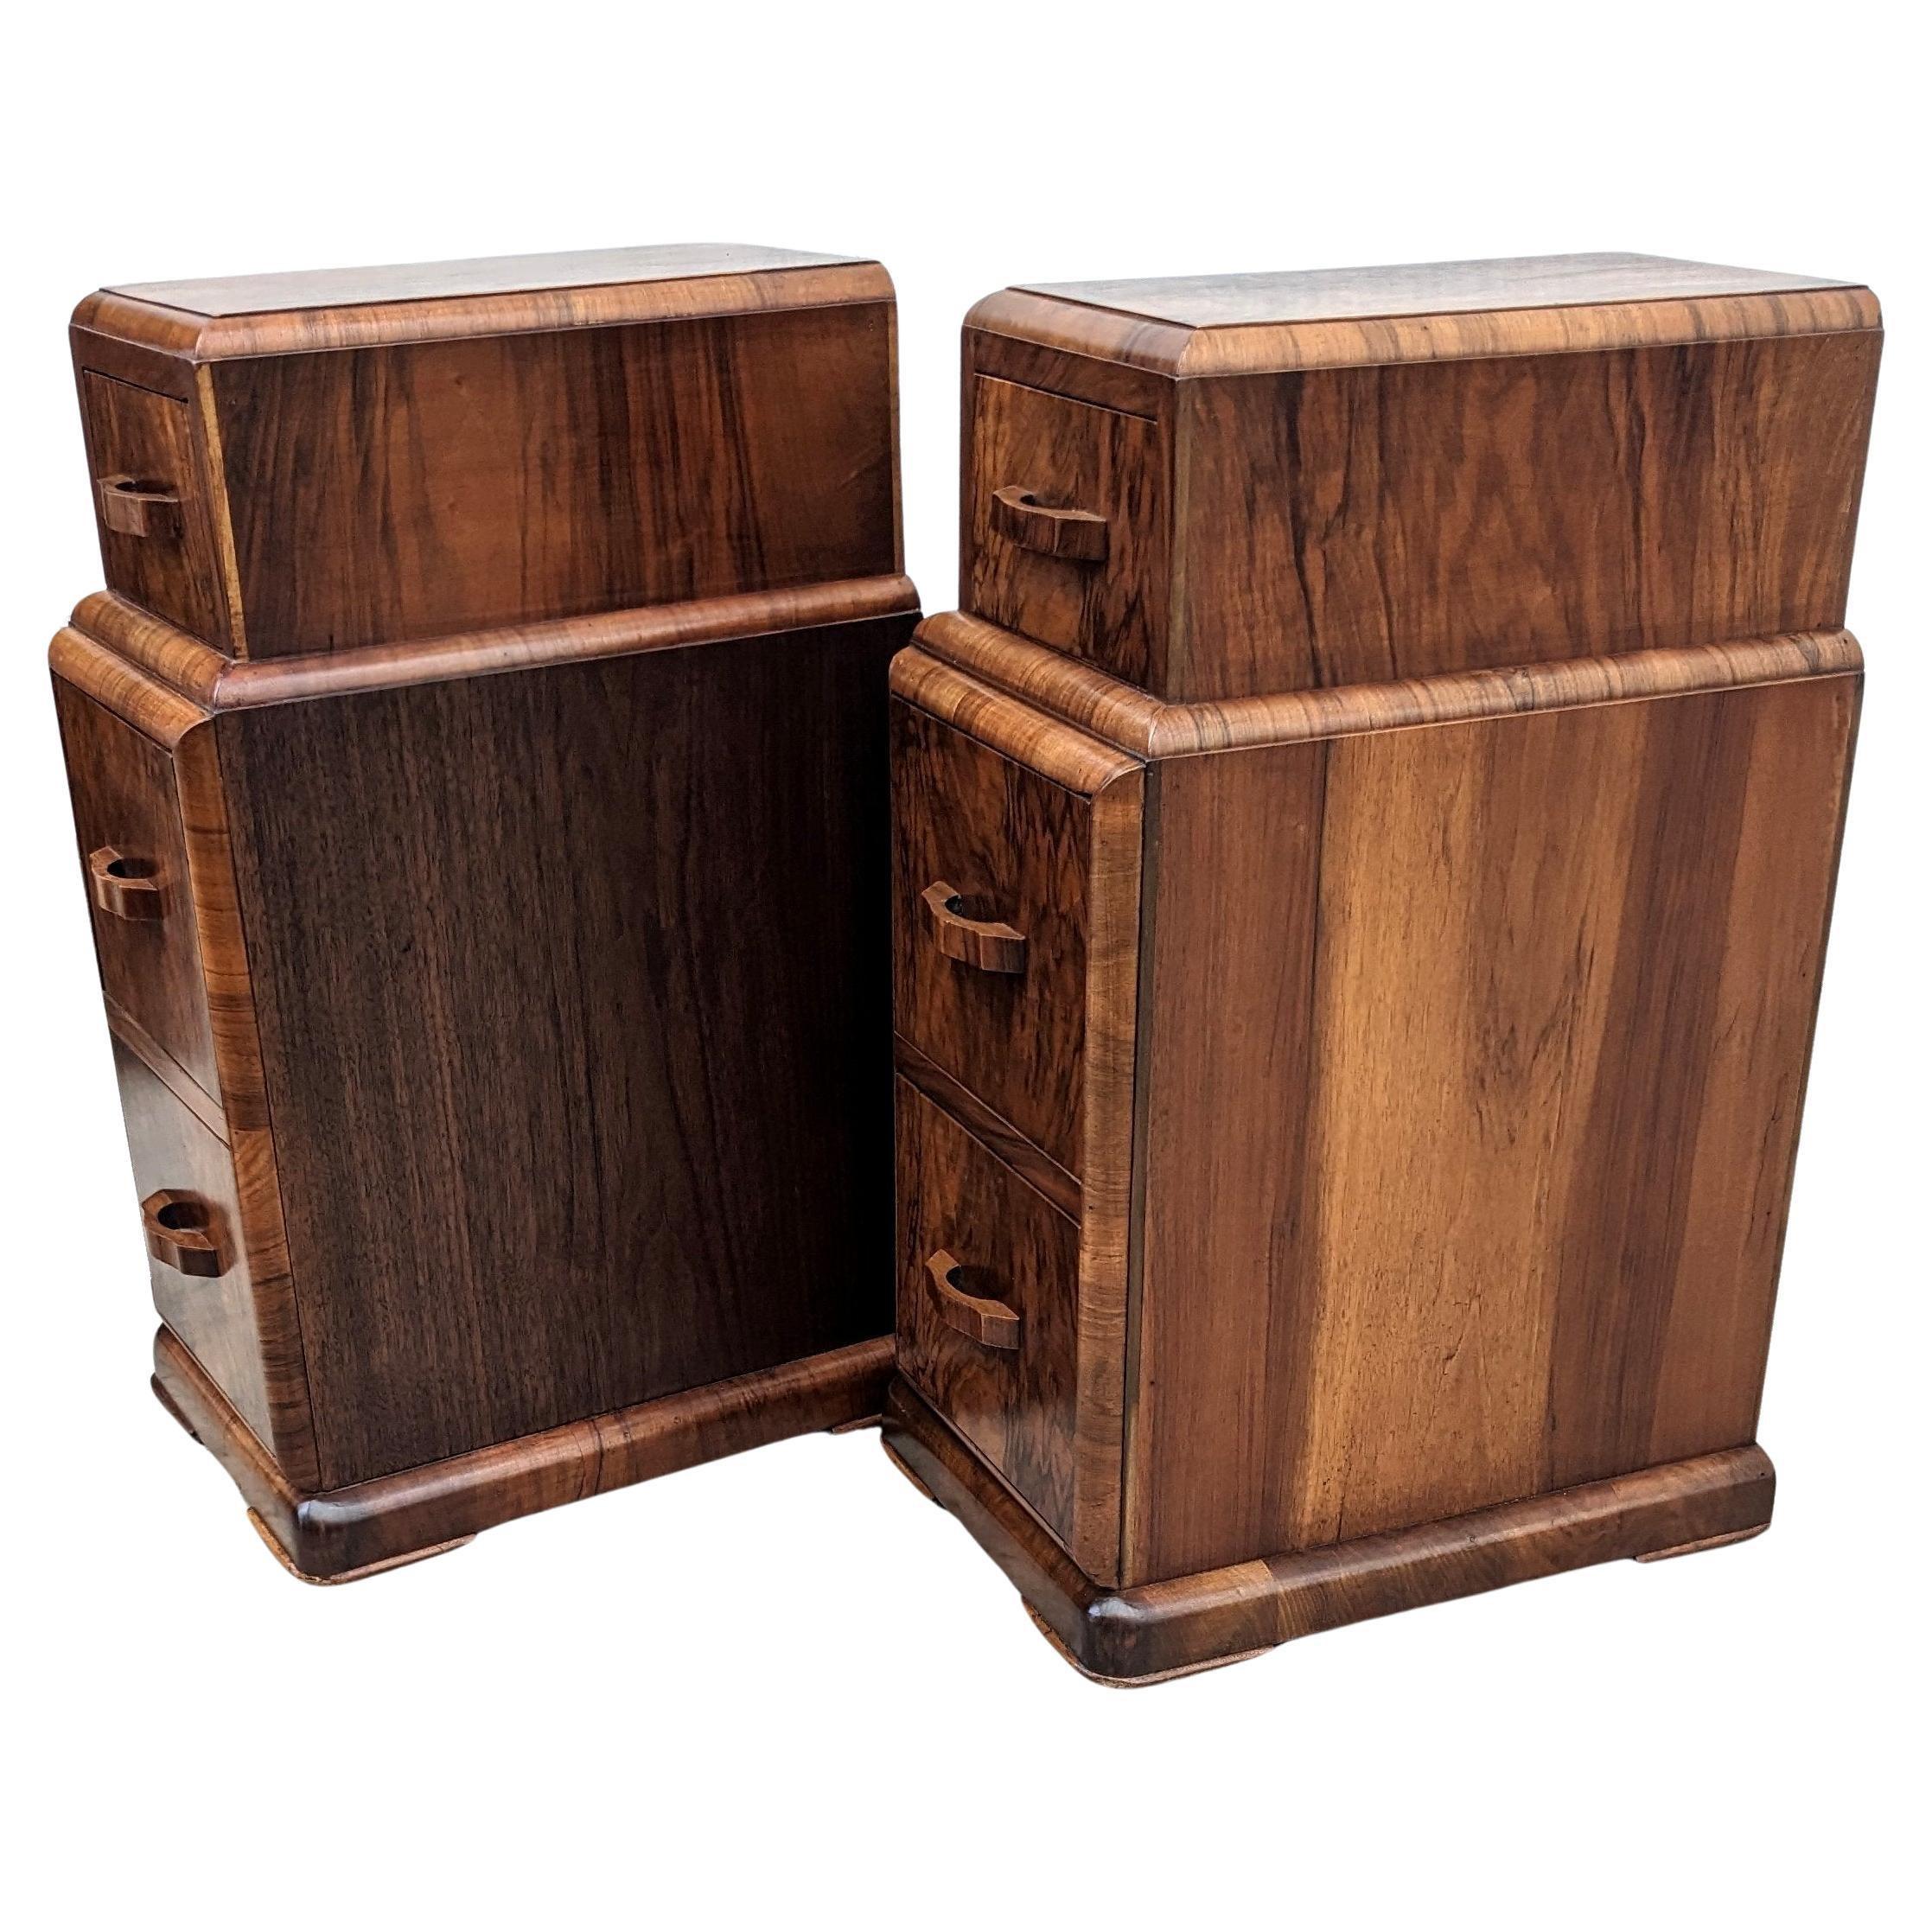 Art Deco Pair of Matching Walnut Bedside Cabinet Night Stands, c1930 For Sale 5